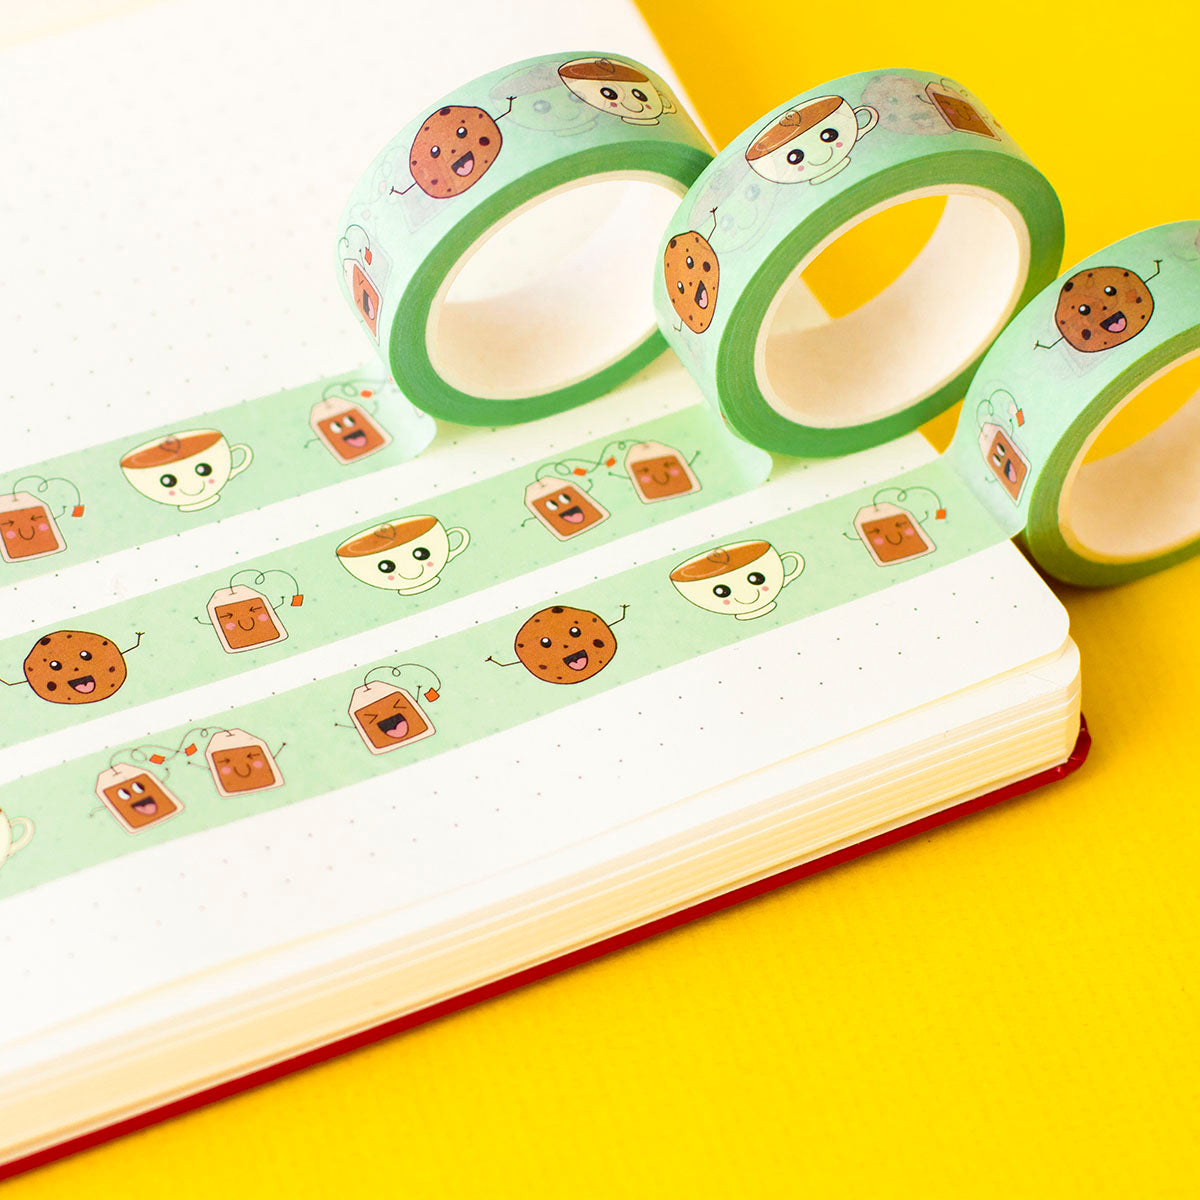 Paper tape for tea loving stationery addicts Par-tea Washi Paper tape with happy Kawaii style tea cups, tea bags and cookies